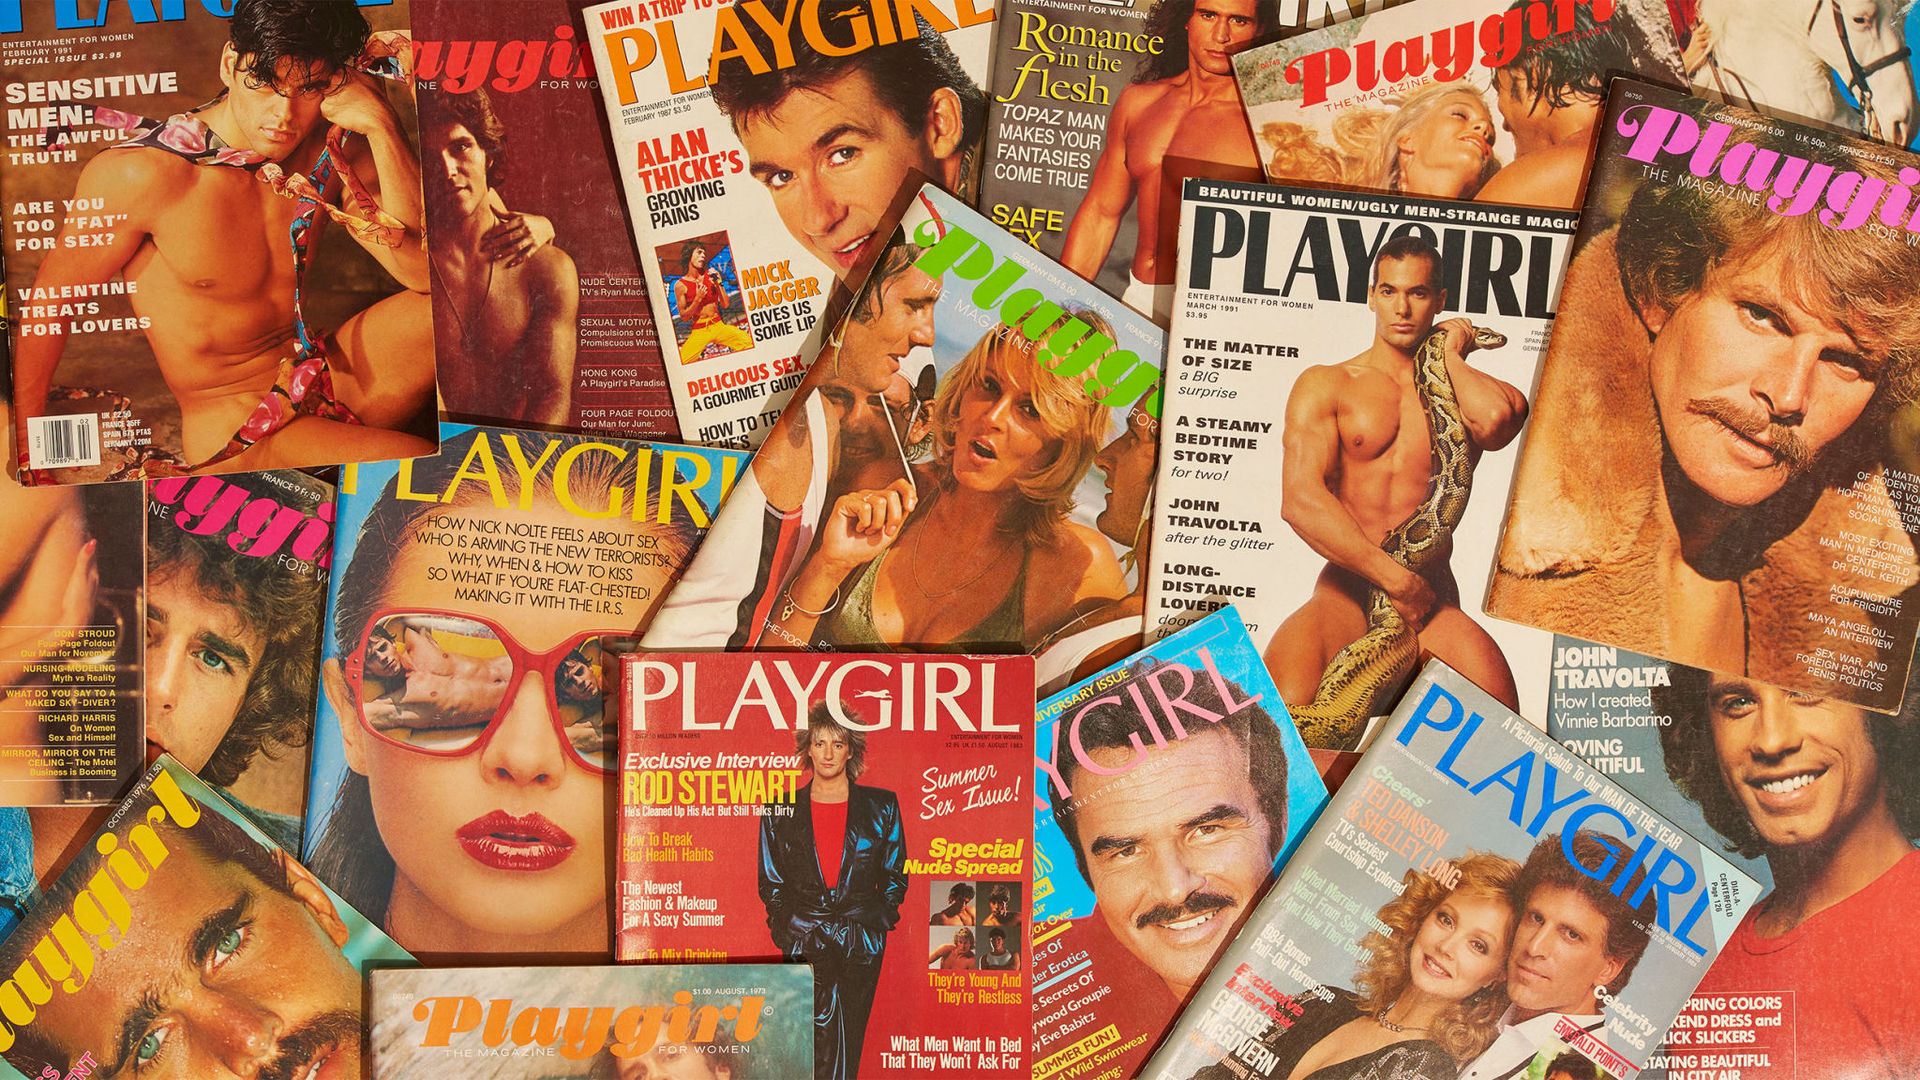 Hd Two Girl One Boy Long Porn Video Download - History of Playgirl Magazine - How Playgirl Normalized Male Nudity